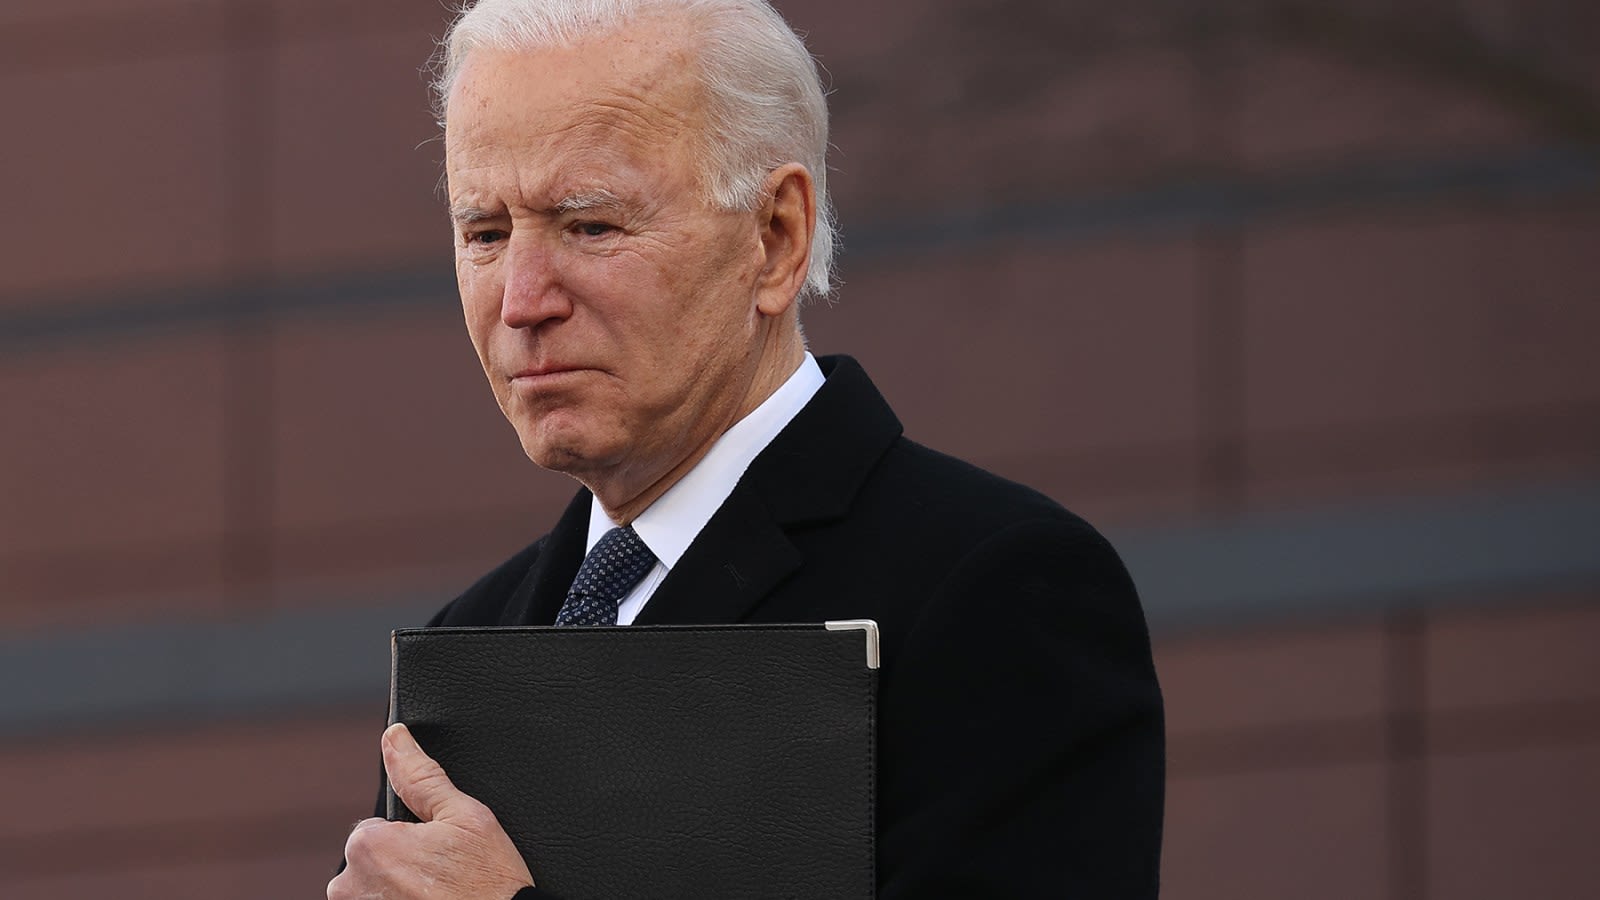 An Insurrection, a Pandemic, and Celebrities: Inside Biden's Rocky Transition Into the White House